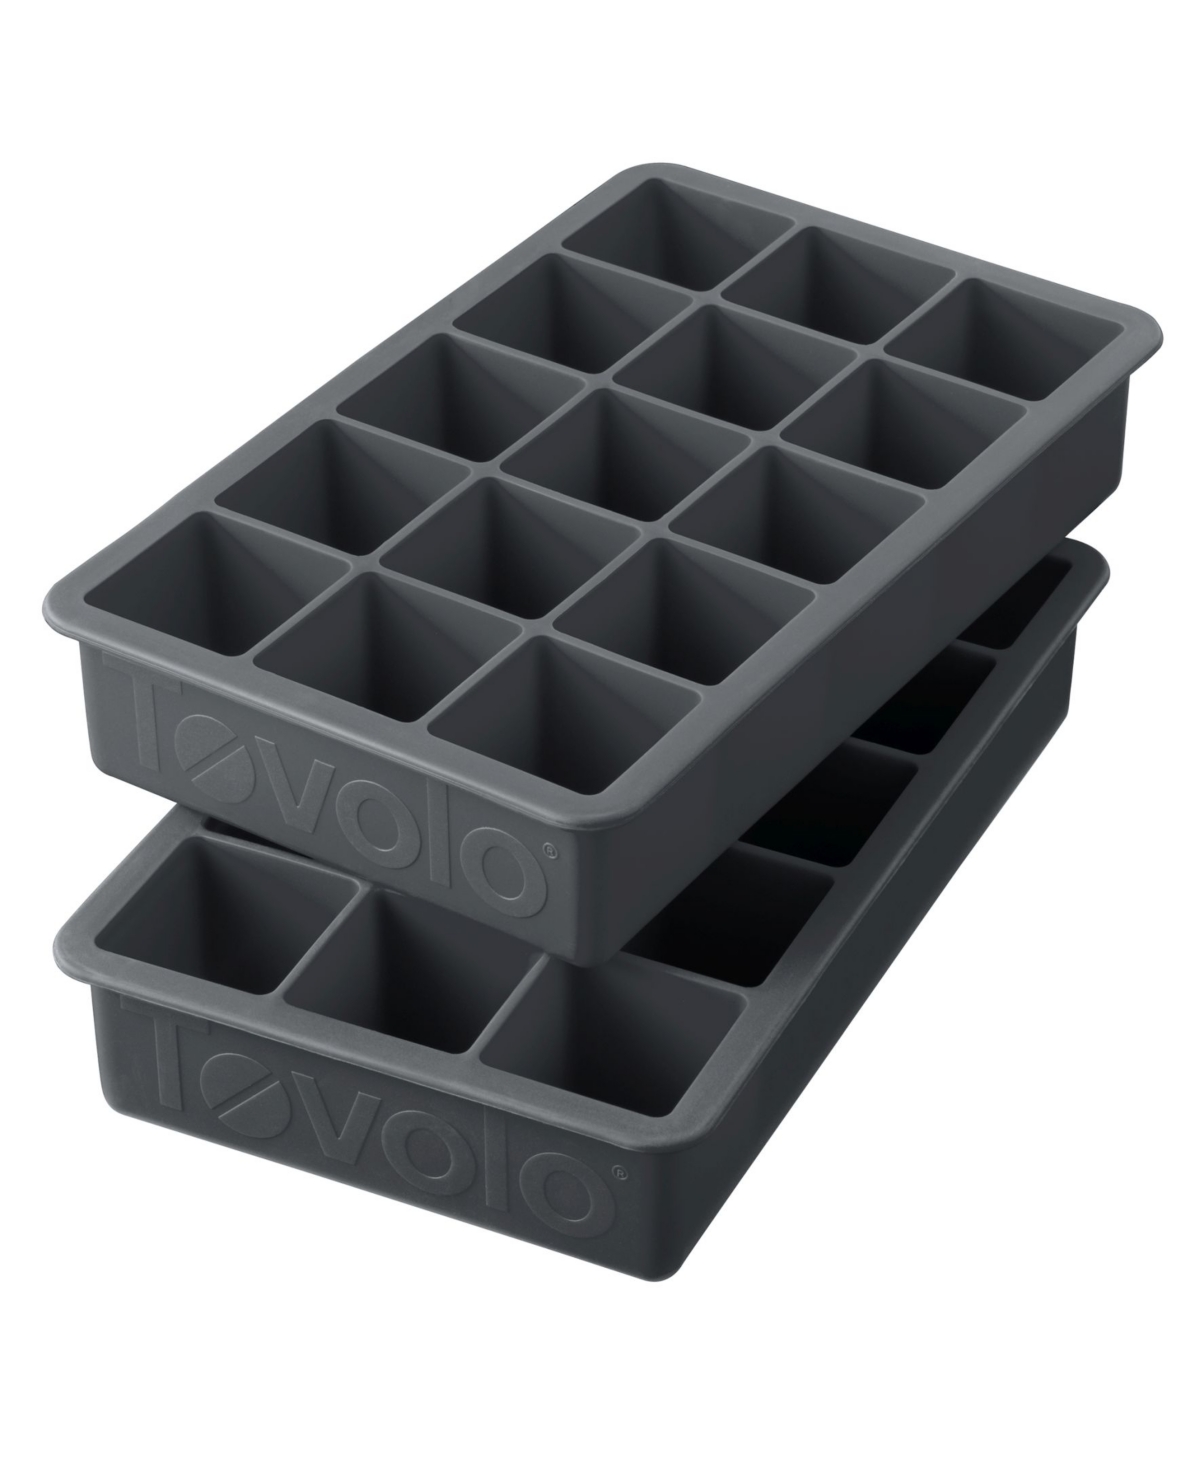 Tovolo Perfect Cube Silicone Ice Mold Freezer Tray Of 1.25" Cubes For Whiskey In Charcoal